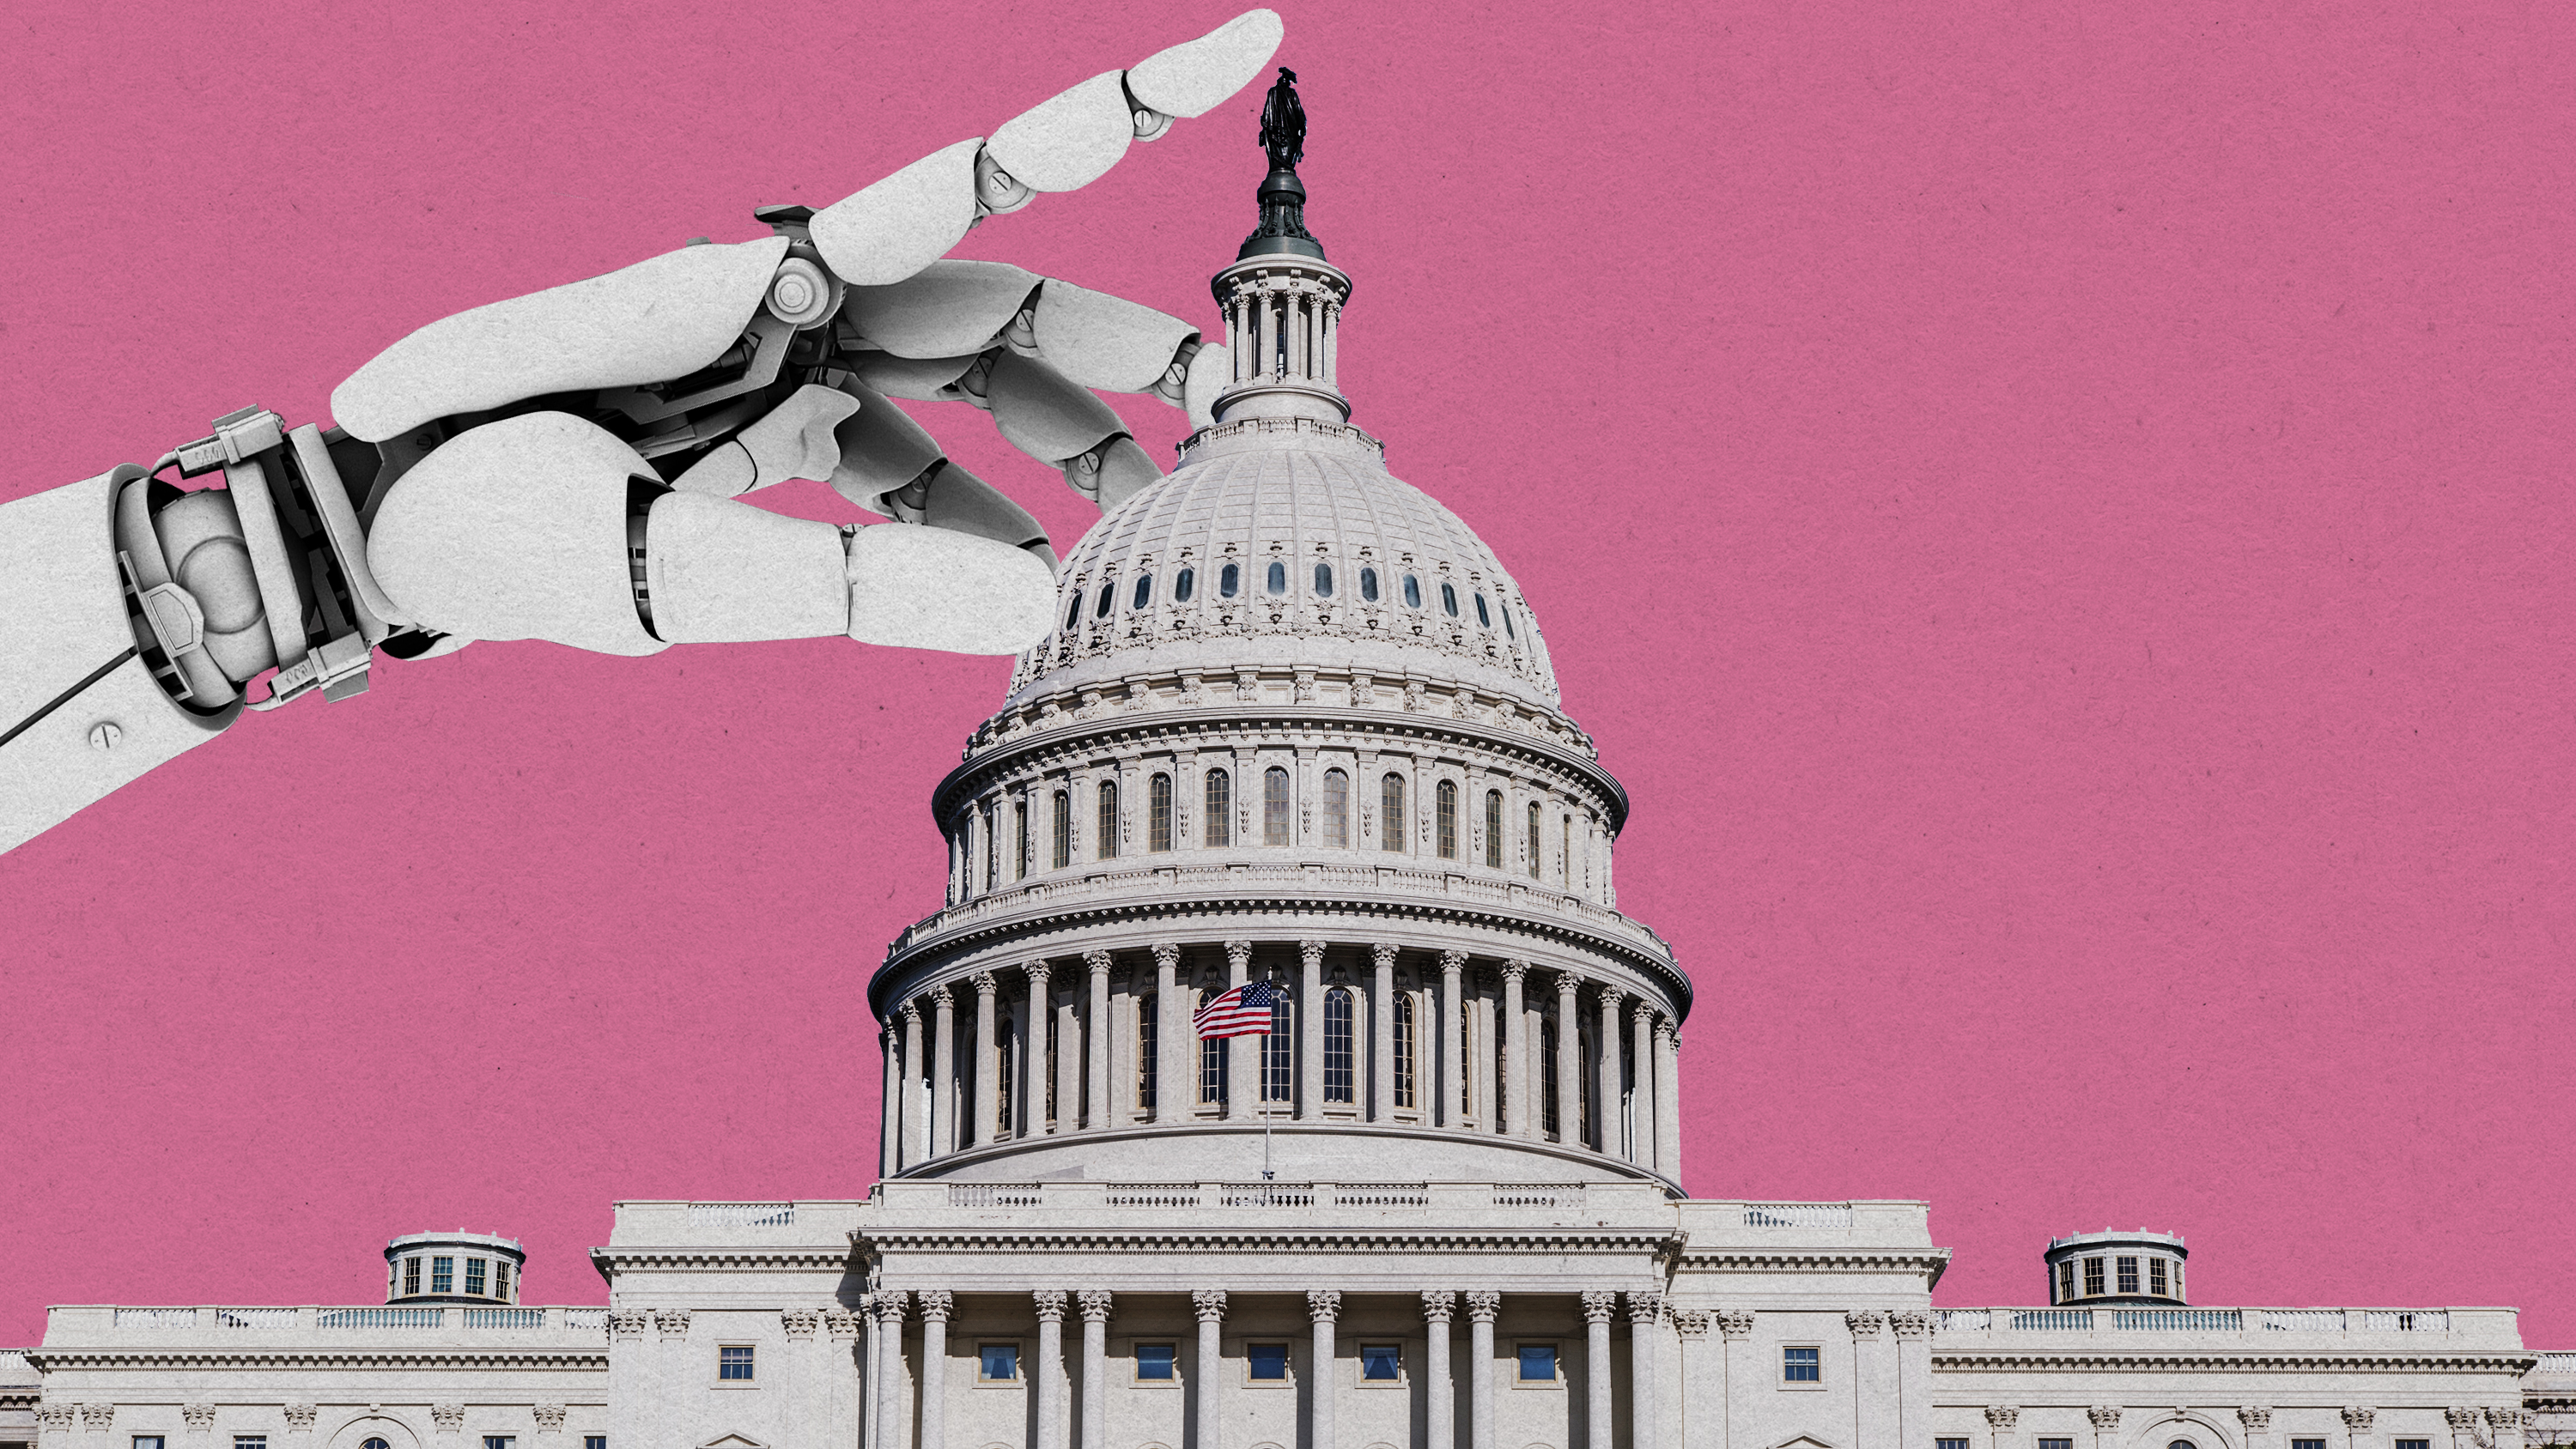 A conceptual illustration of artificial intelligence regulation shows a robotic hand reaching for the dome of Congress